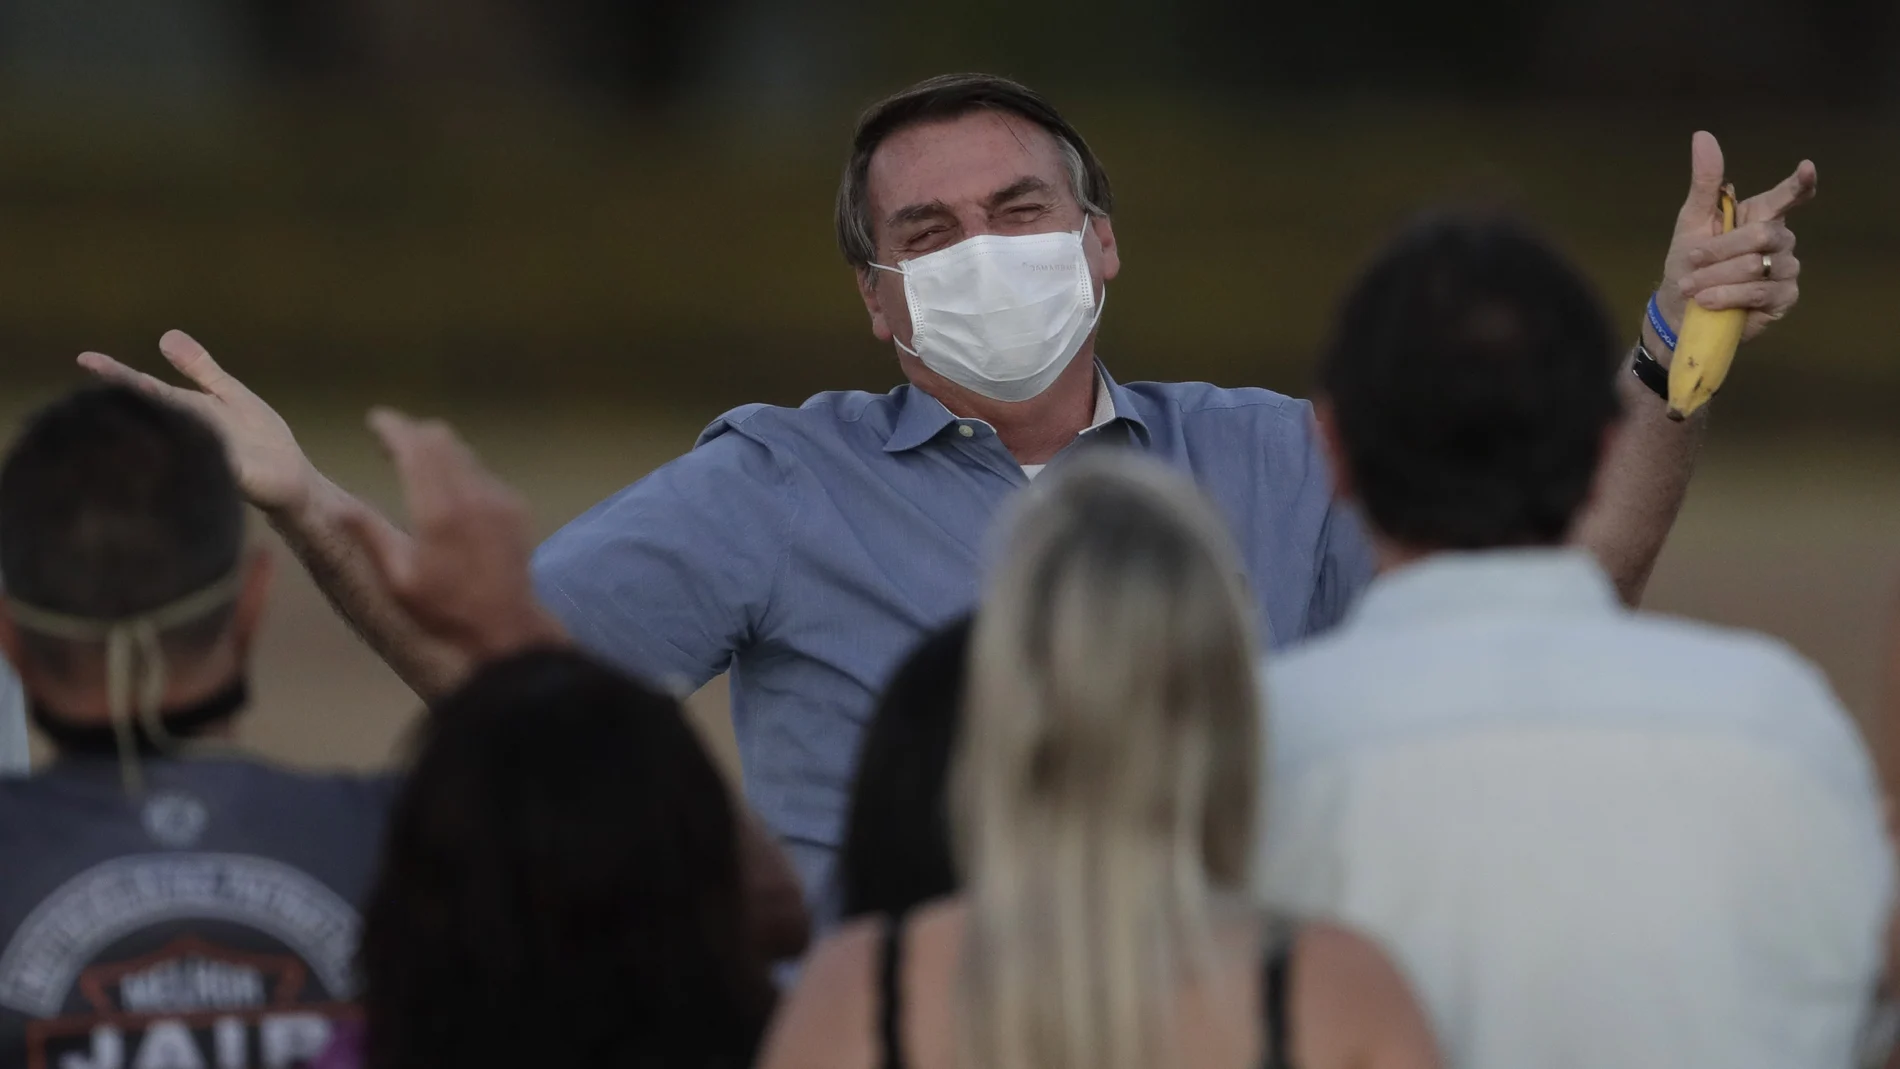 FILE - in this July 24, 2020 file photo, Brazil's President Jair Bolsonaro, who is infected with COVID-19, wears a protective face mask as he talks with supporters during a Brazilian flag retreat ceremony outside his official residence the Alvorada Palace, in Brasilia, Brazil. The South American nation proud of its role as a regional leader in science, technology and medicine, finds itself falling behind its neighbors in the global race for immunization against a pandemic that has already killed nearly 200,000 of its people. (AP Photo/Eraldo Peres, File)